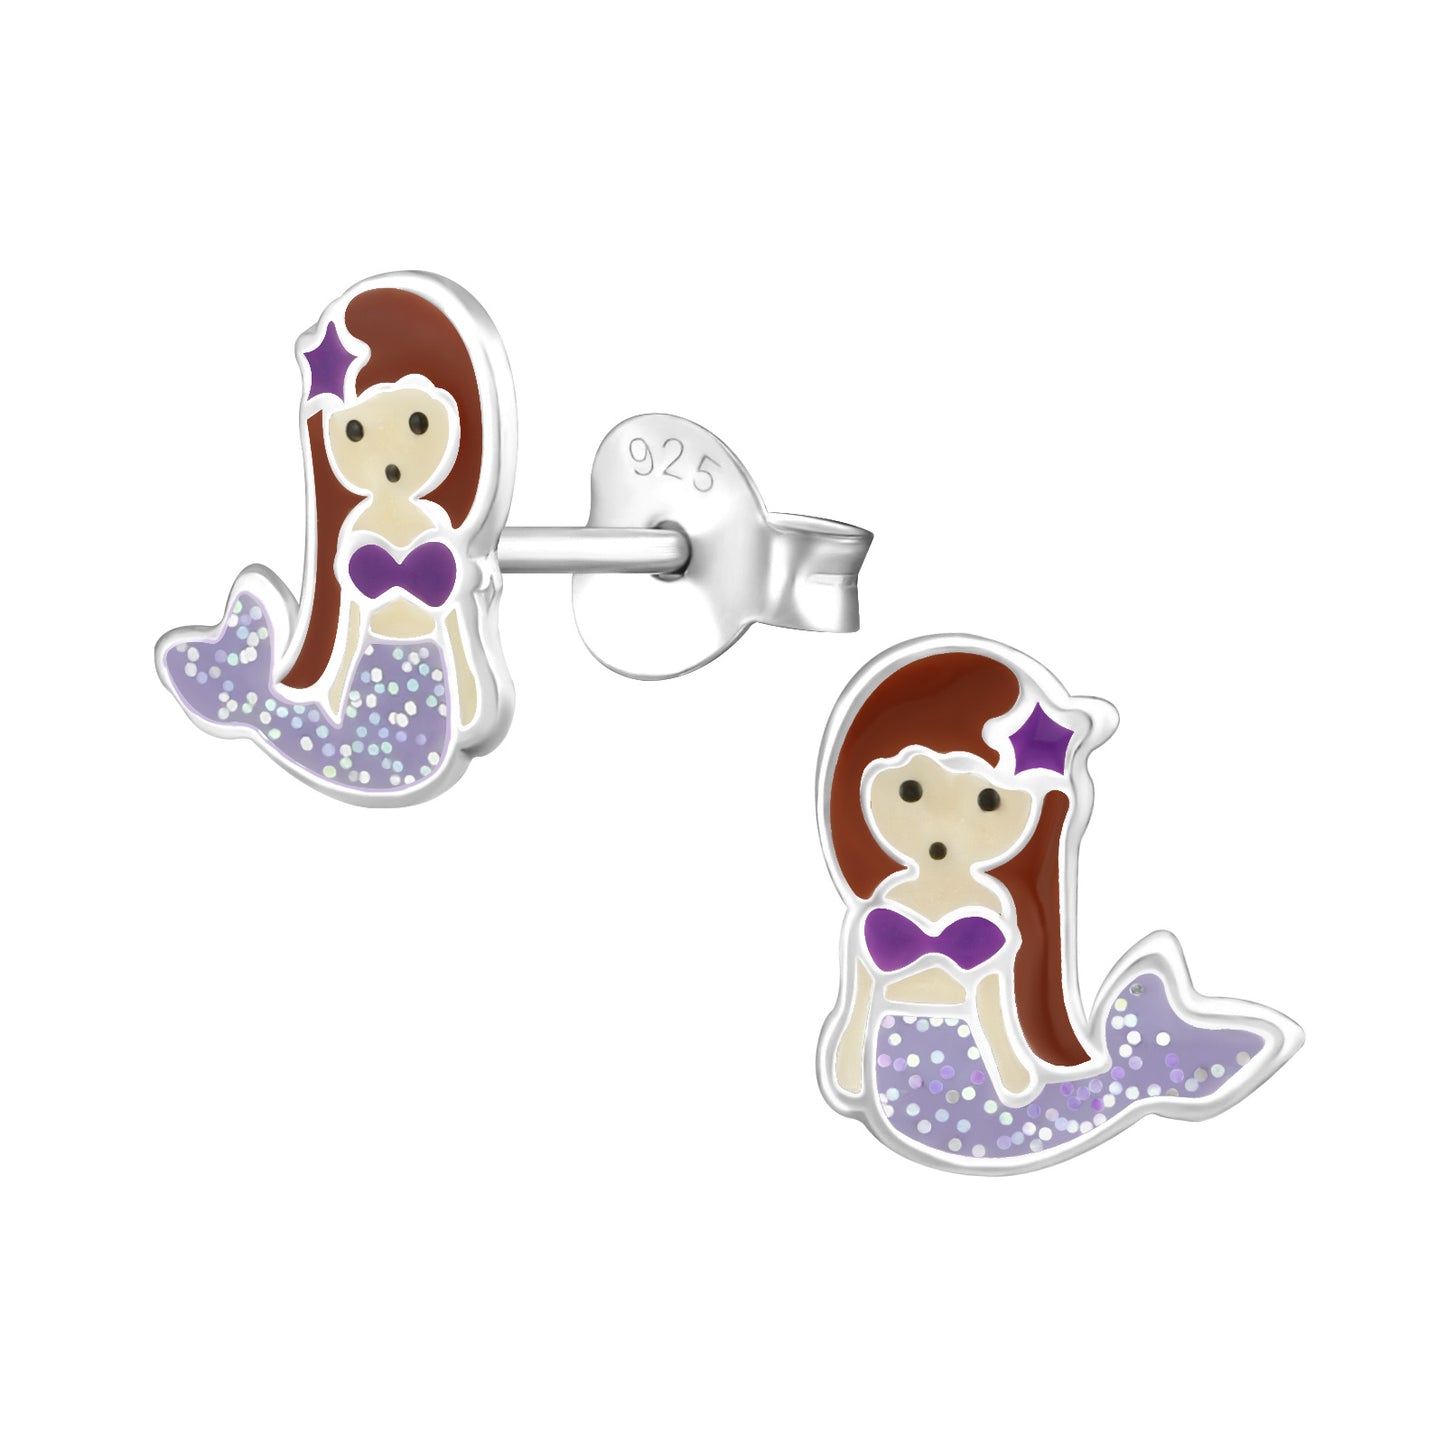 Brown Hair Mermaid with Glitter Purple Tail: Children's Earrings made from sterling silver. Brown Hair Brunette Mermaid with Purple Sparkly glitter tail